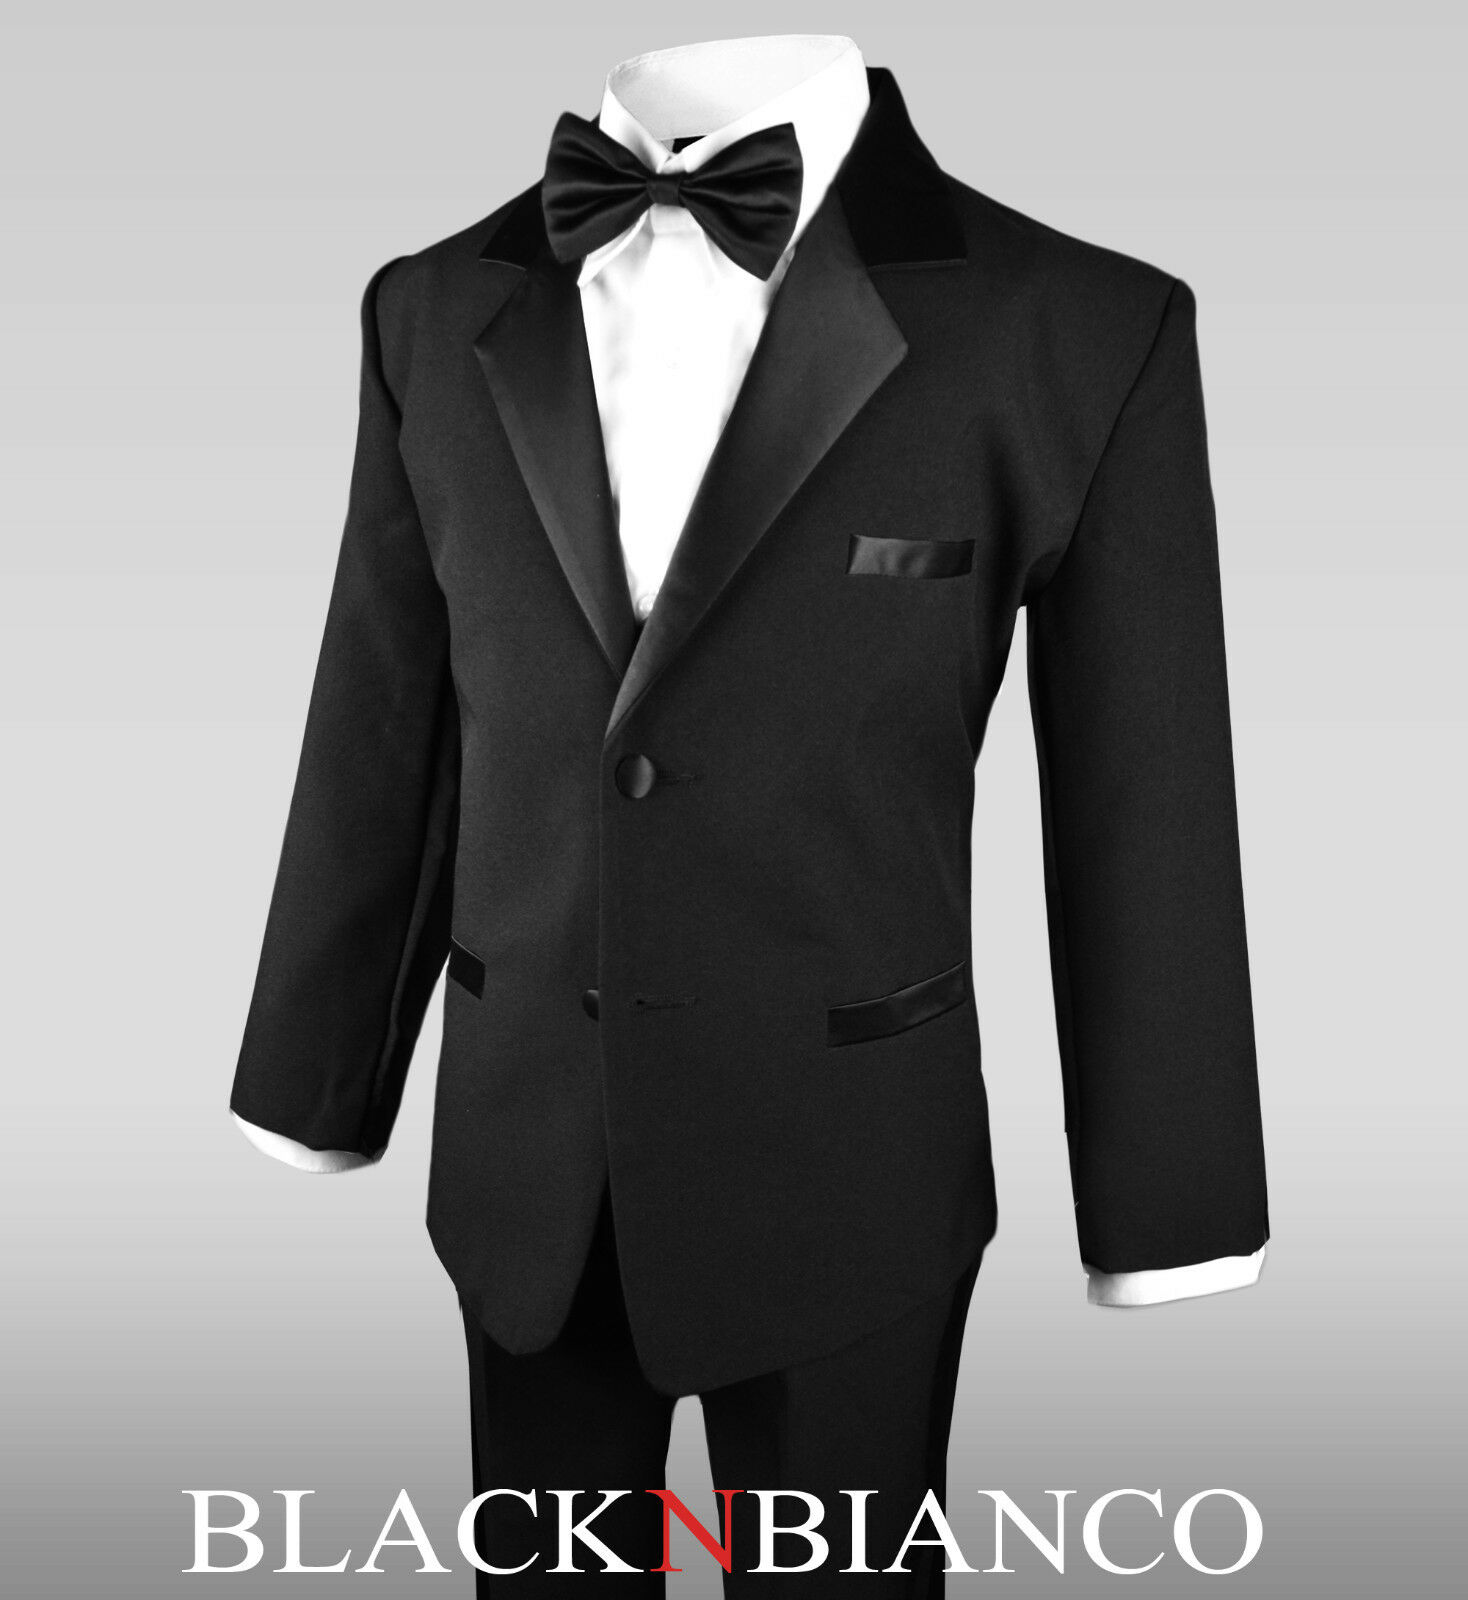 Boys Black Tuxedo For Kids Of All Ages Formal Wear With  Black Bow Tie